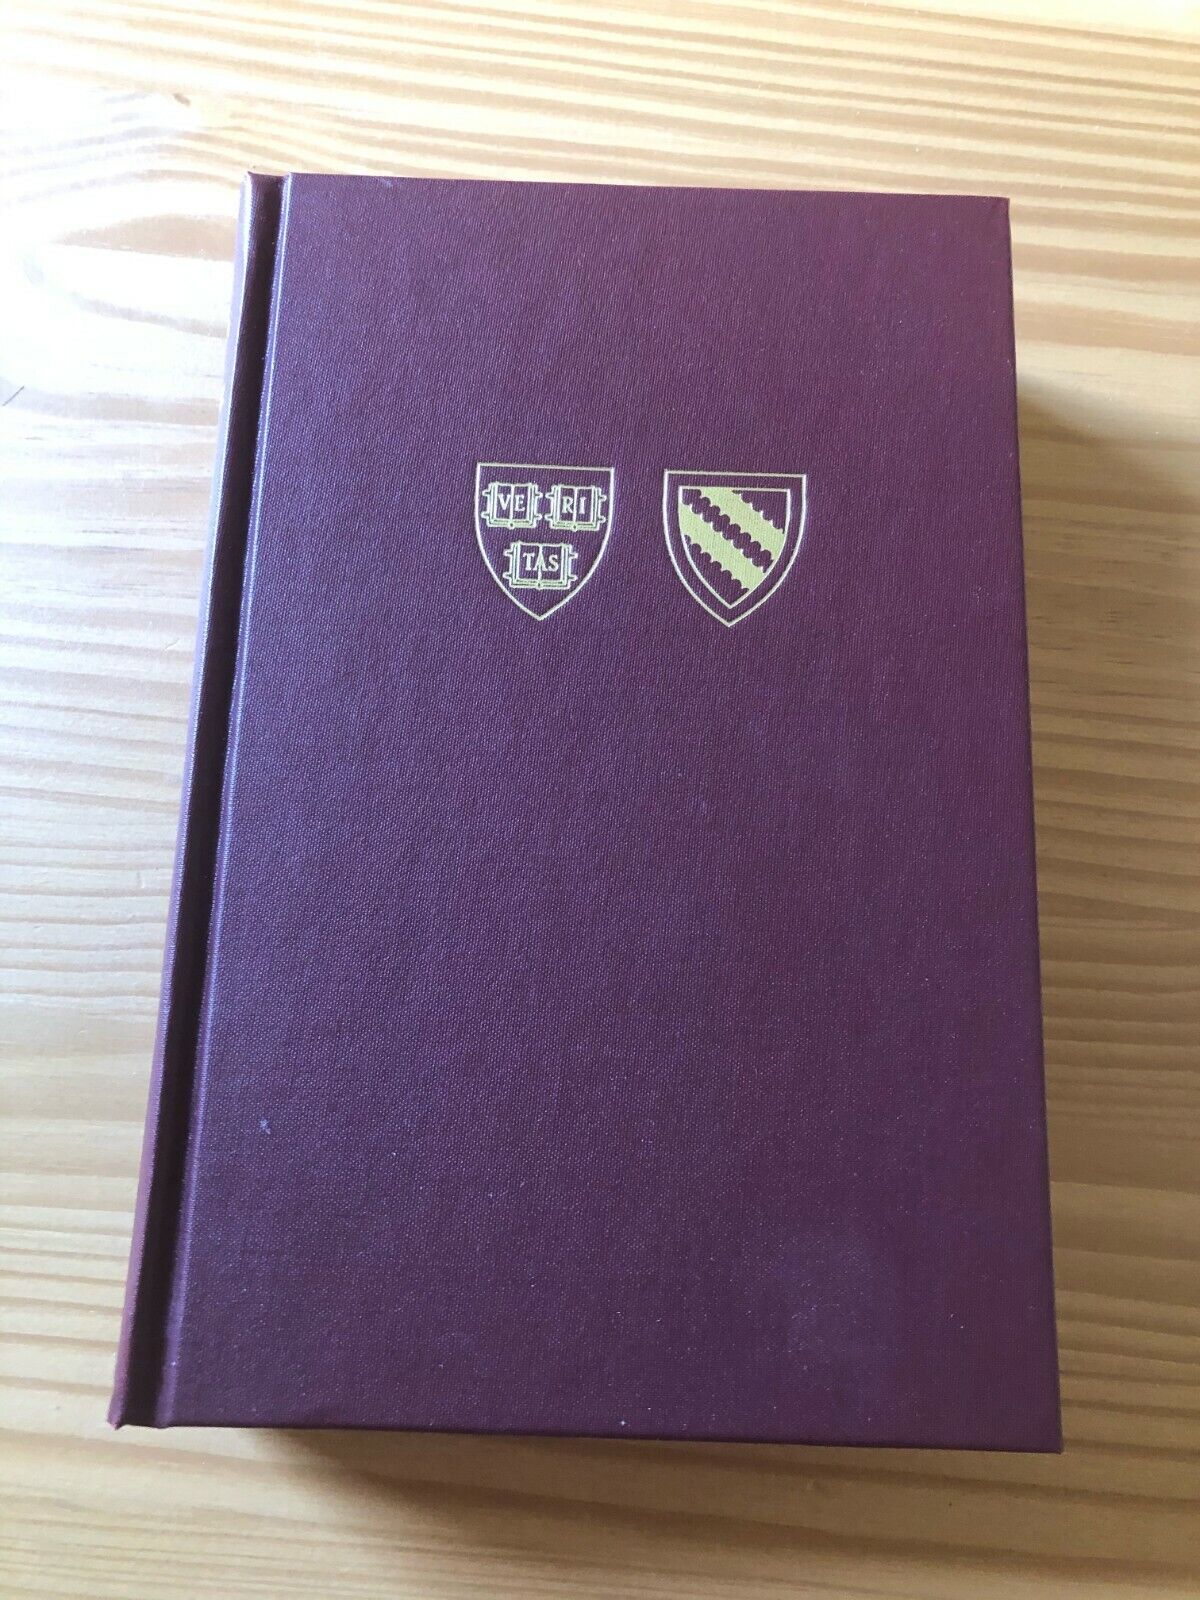 Harvard and Radcliffe Class of 1996 25th Anniversary Report 2021 @ Hardcover NEW